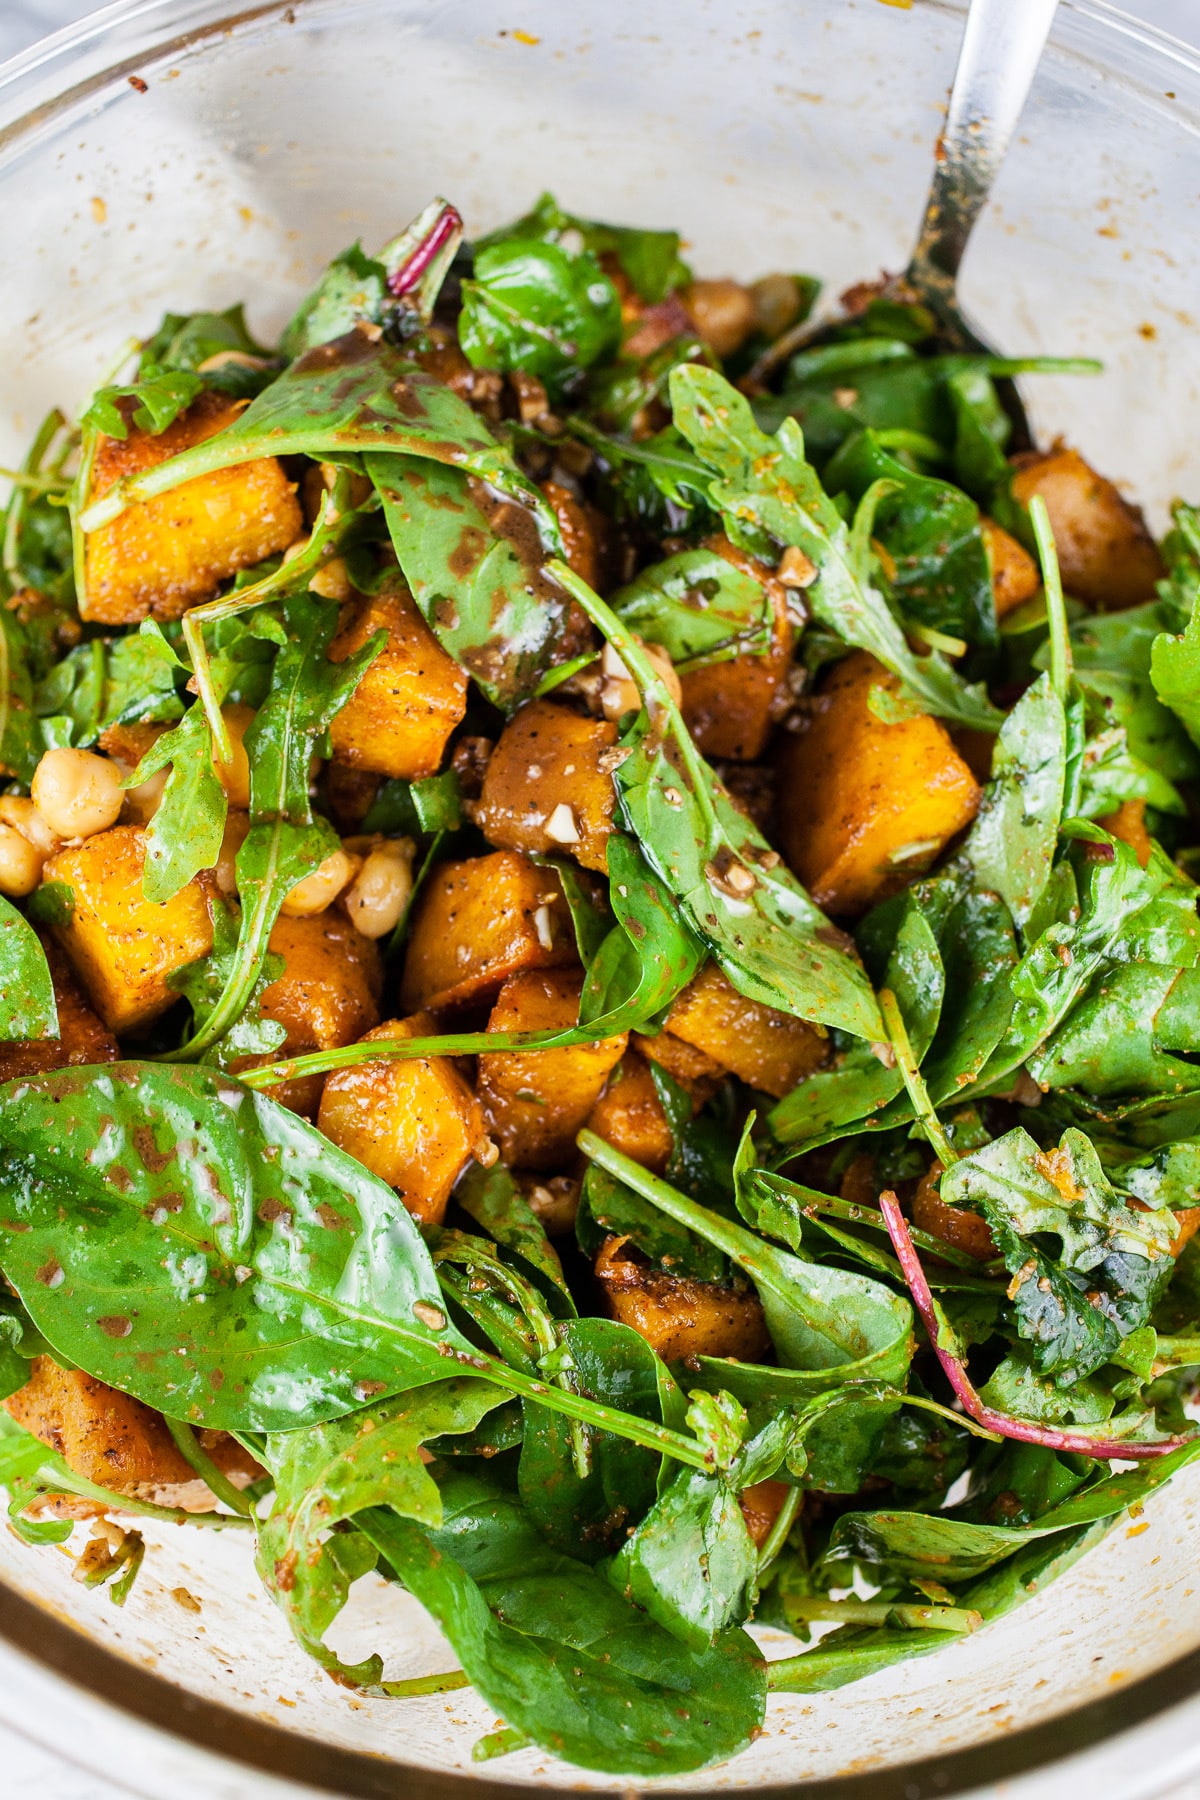 Roasted pumpkin, chickpeas, and greens tossed with balsamic dressing in large glass bowl.